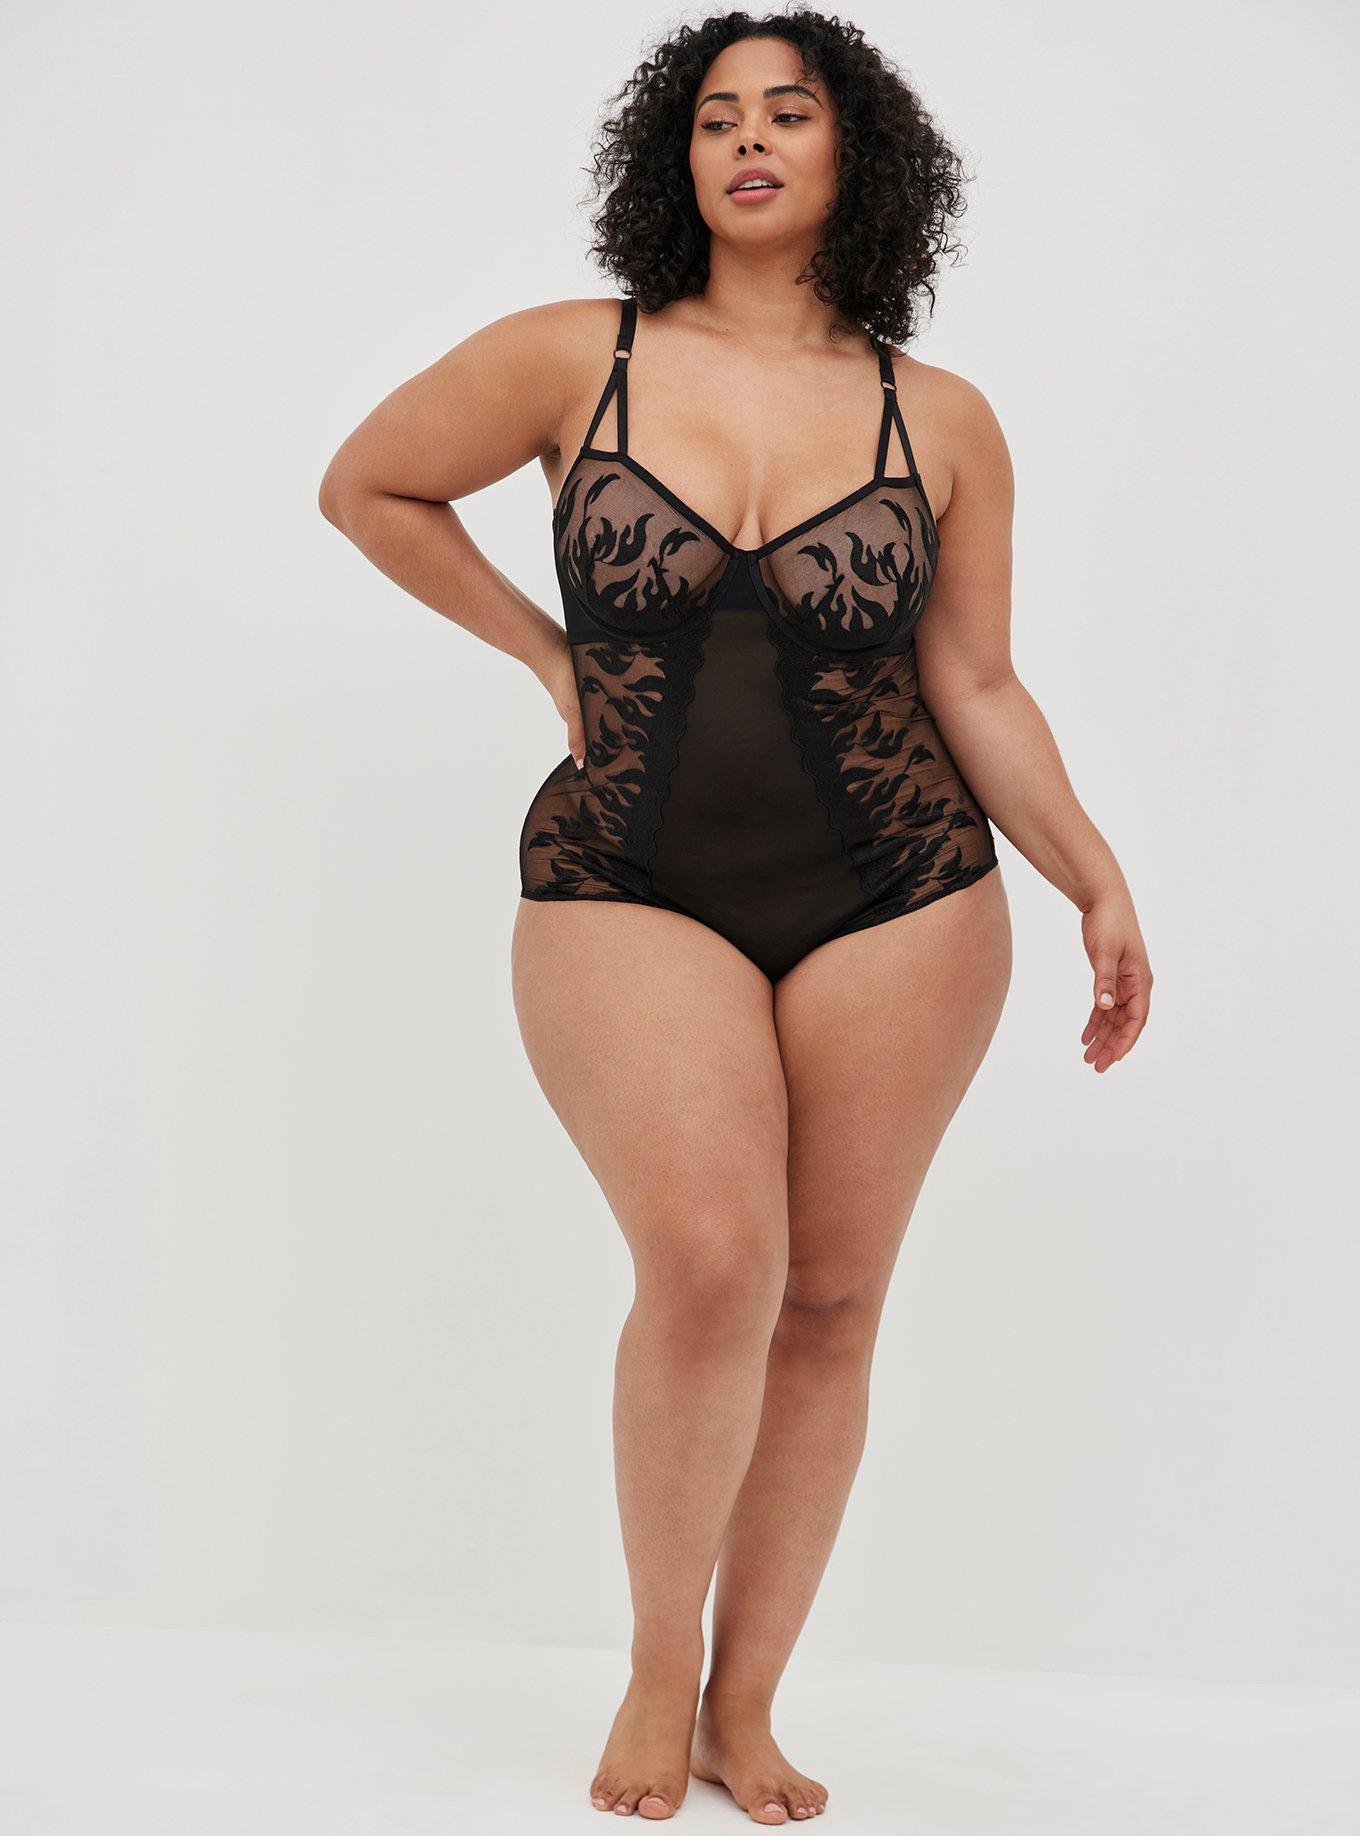 Plus Size - Unlined Underwire Bodysuit - Embroidered Flames Black